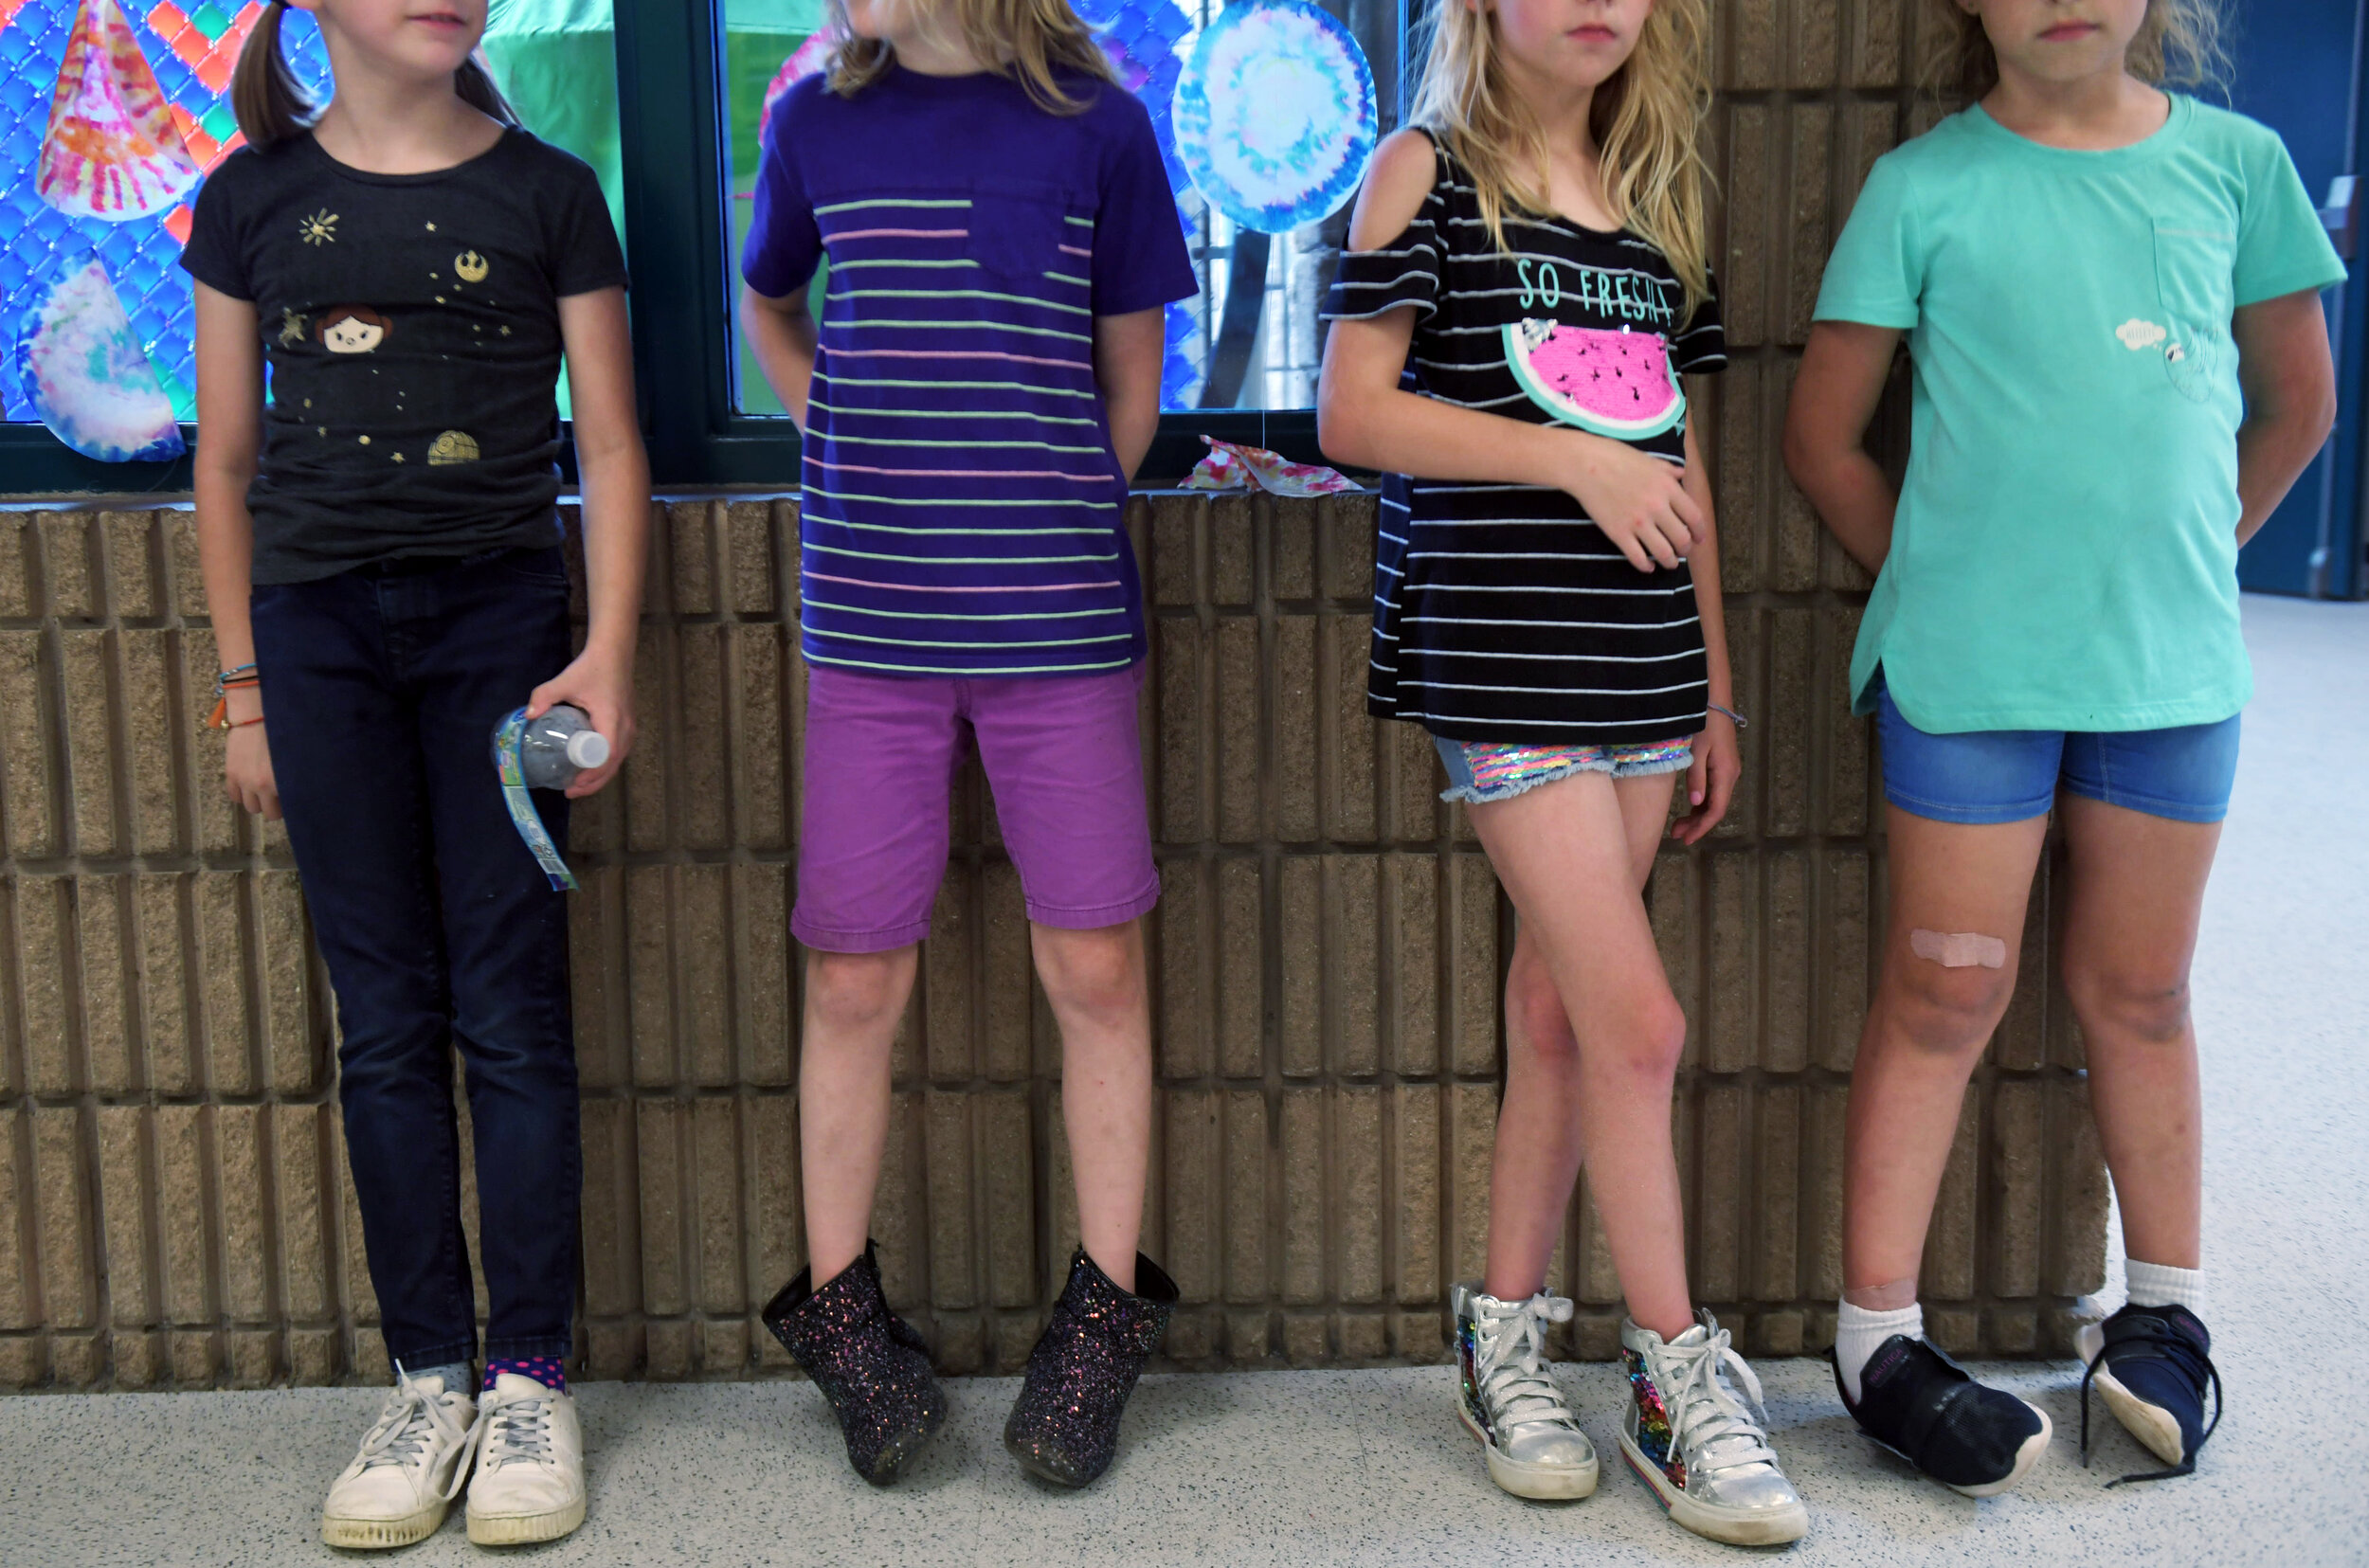  Keegan, a gender creative child, then 8, middle left, stands with his 3rd grade classmates in between classes at his 3rd grade elementary school in Austin, Texas, U.S., May 3, 2019.   His teacher says he is a leader in his class, and has grown a lot